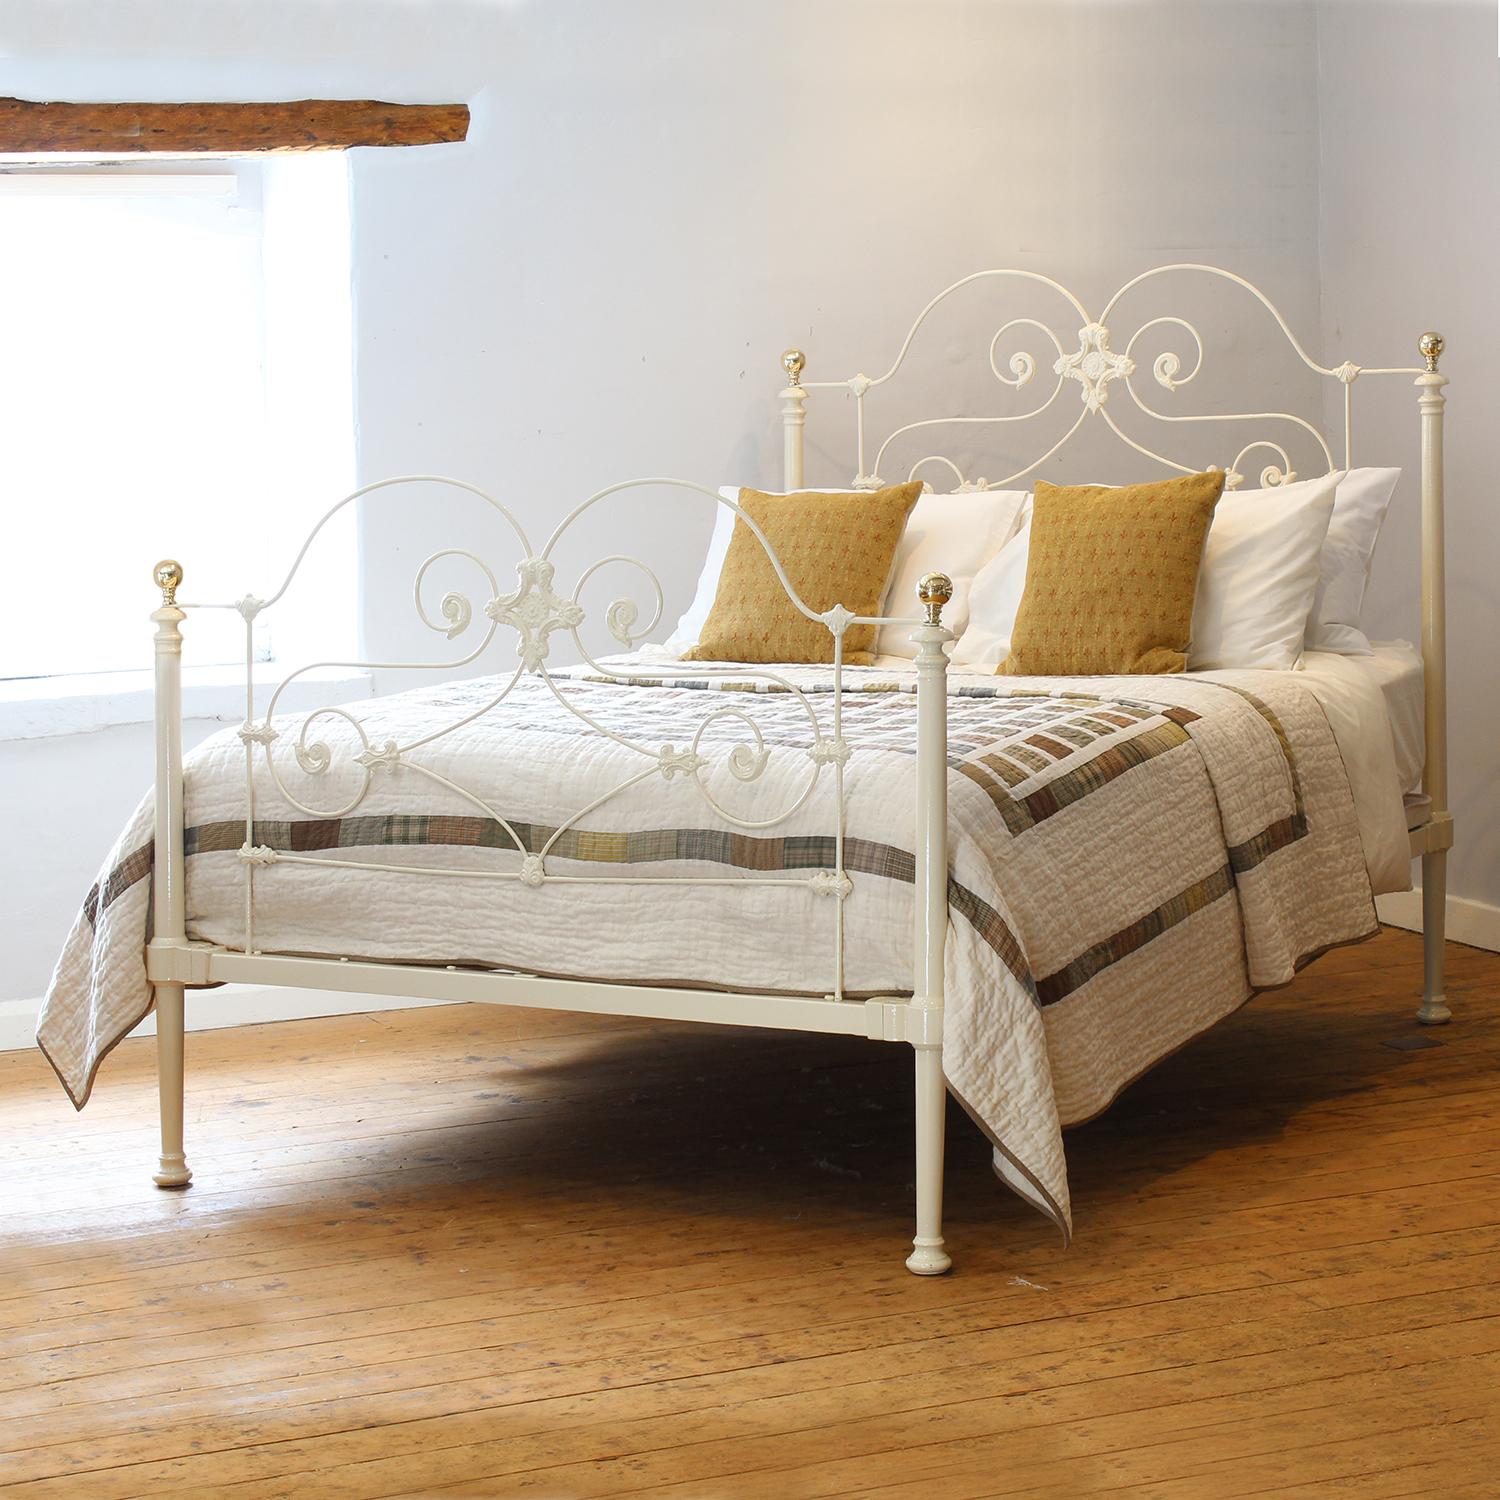 A superb mid Victorian cast iron bedstead with arched frame frame and ornate castings.

This bed accepts a UK King or US Queen, 5ft or 60in wide, mattress and base.

The price also includes a firm bed base to support the mattress.

The